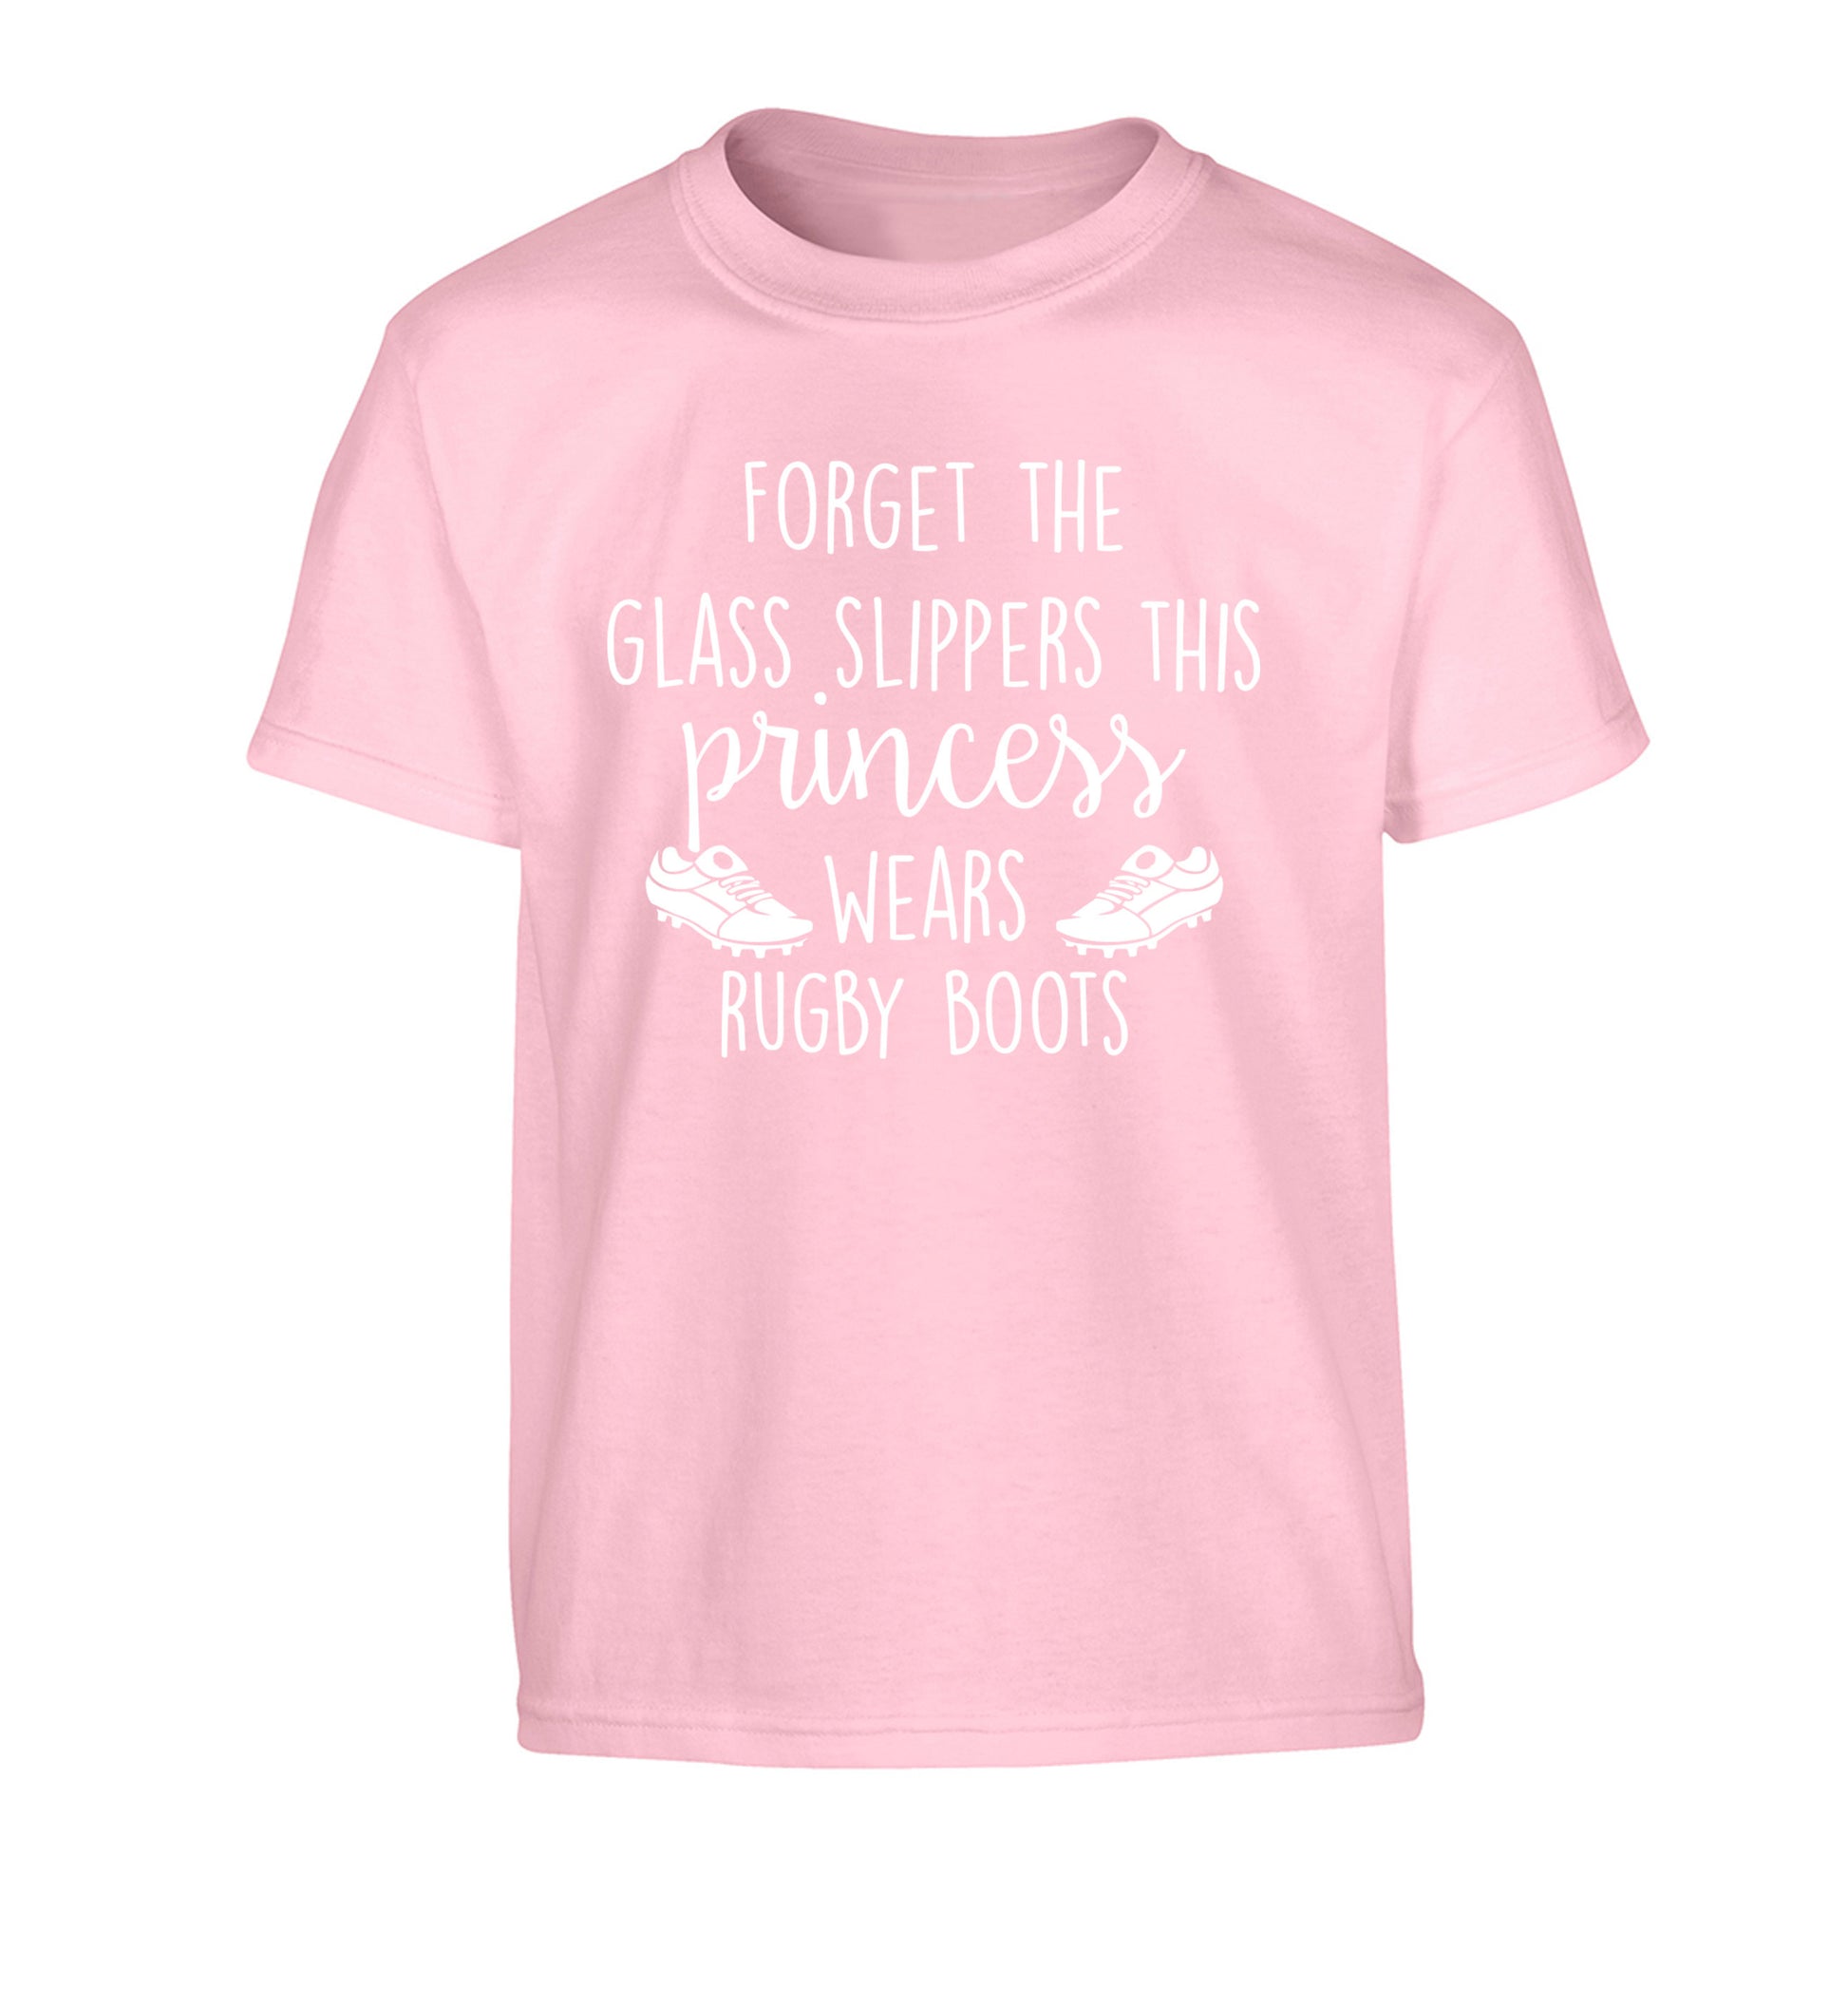 Forget the glass slippers this princess wears rugby boots Children's light pink Tshirt 12-14 Years